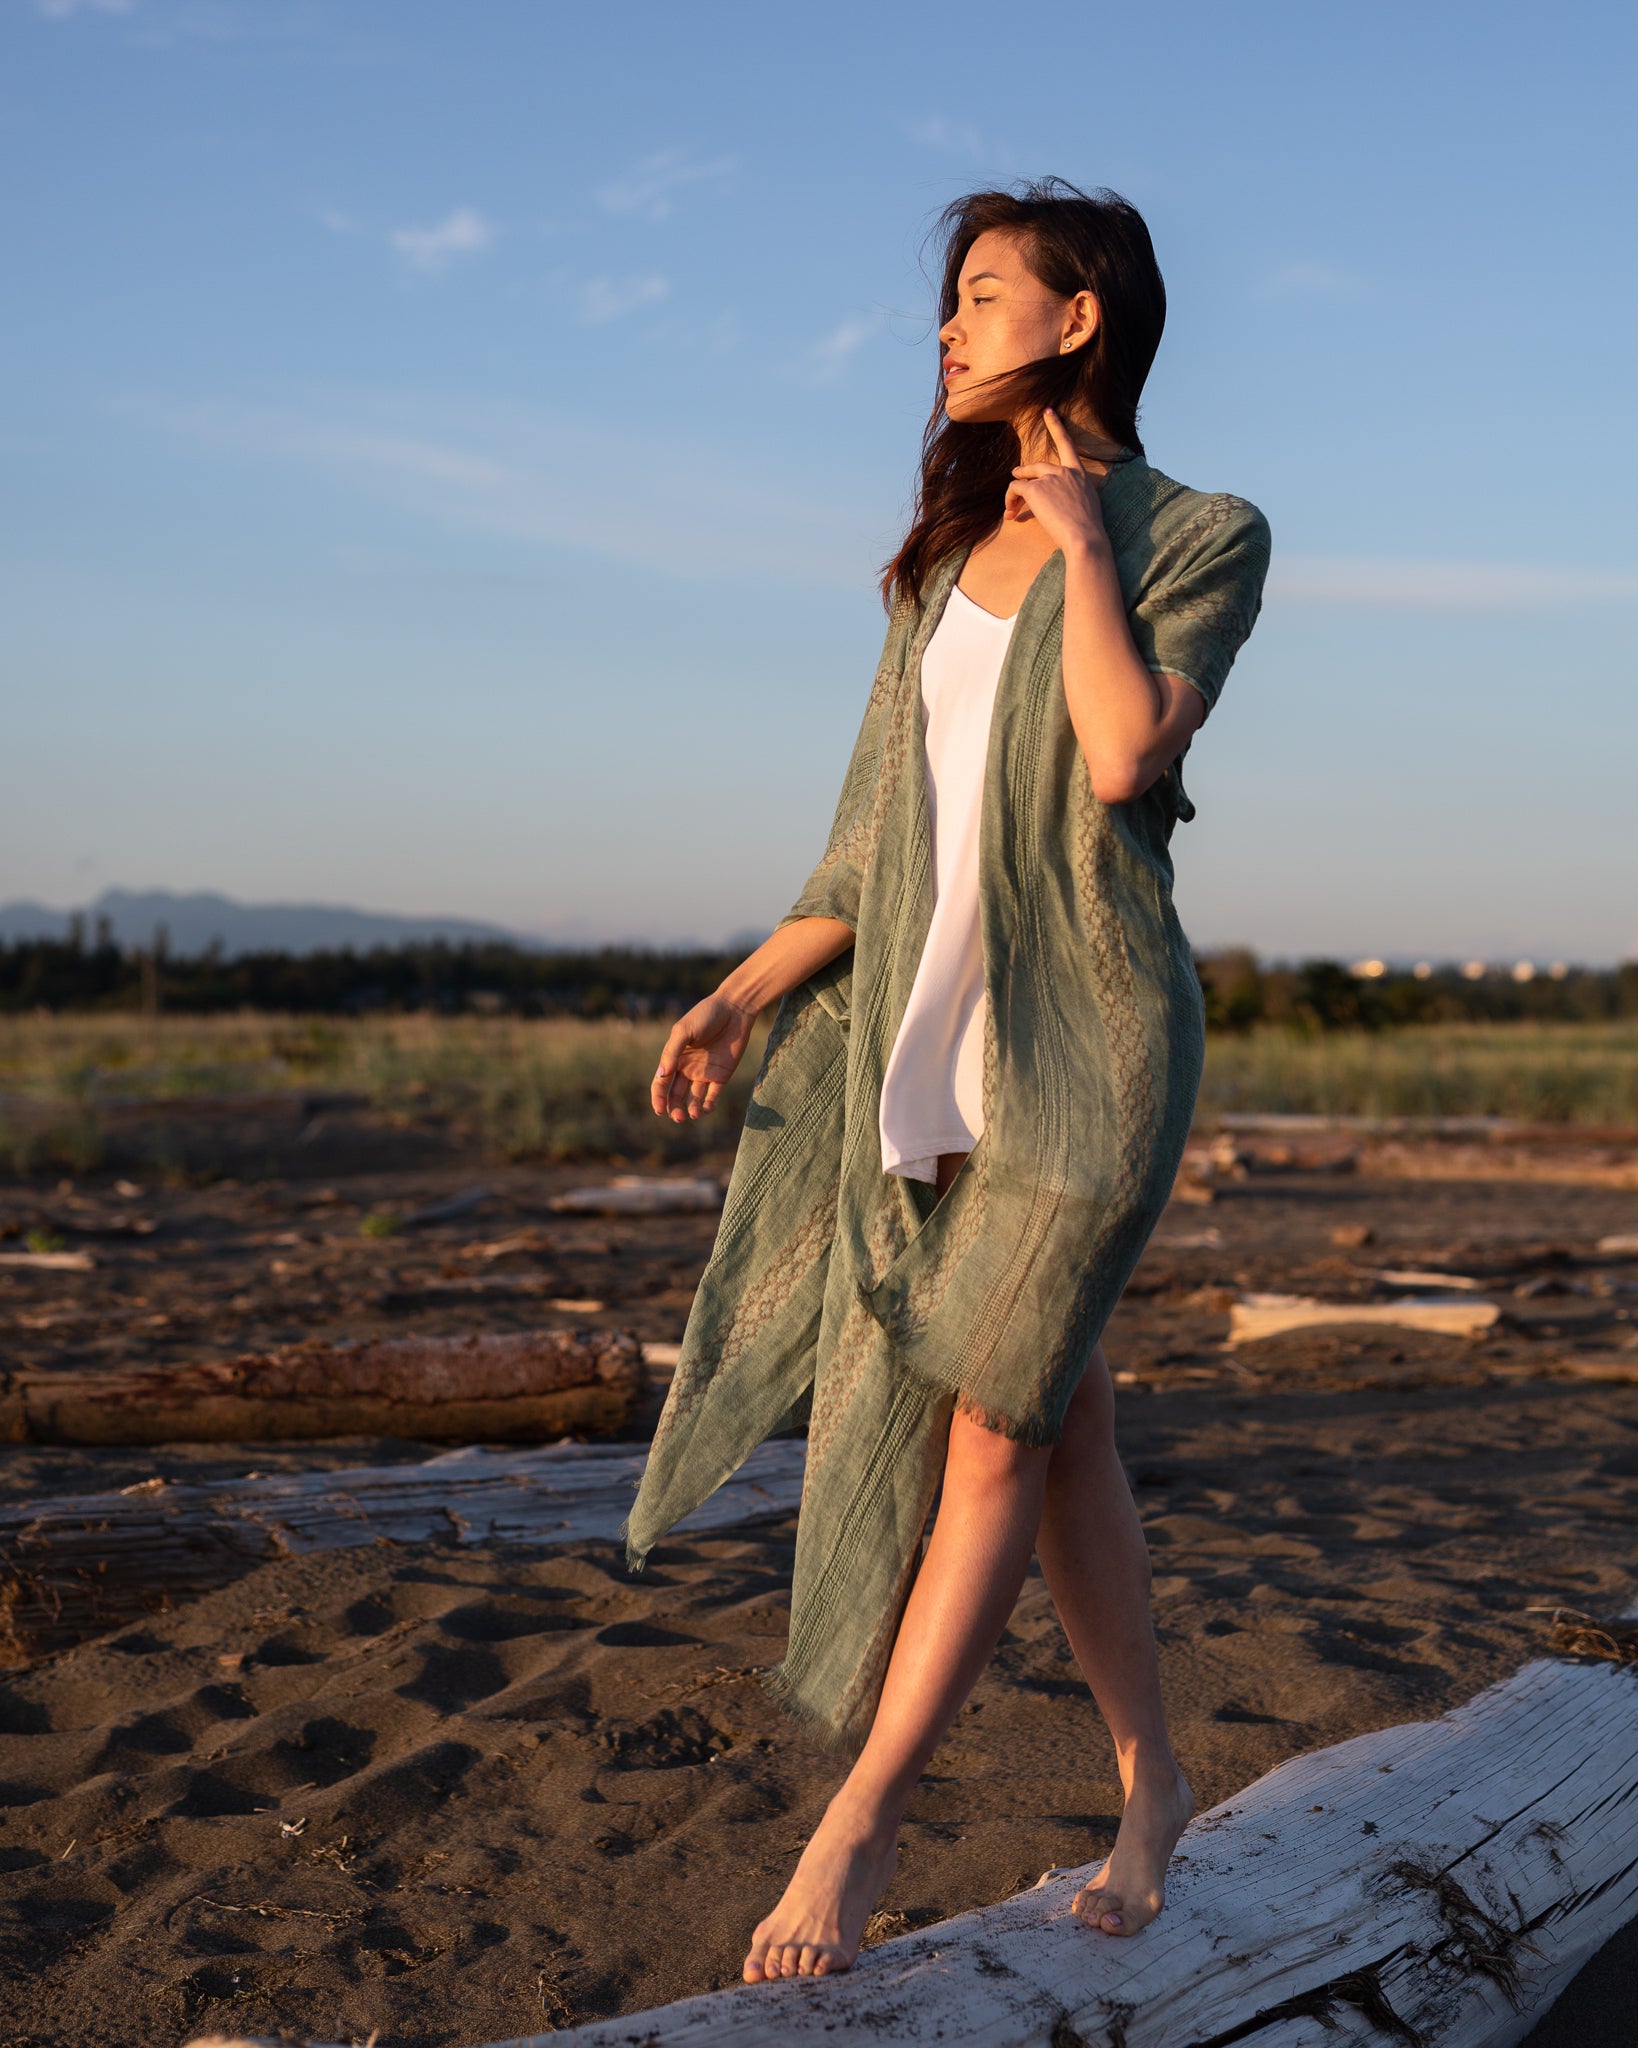 Women standing on beach wearing green beach cover up staring at sunset